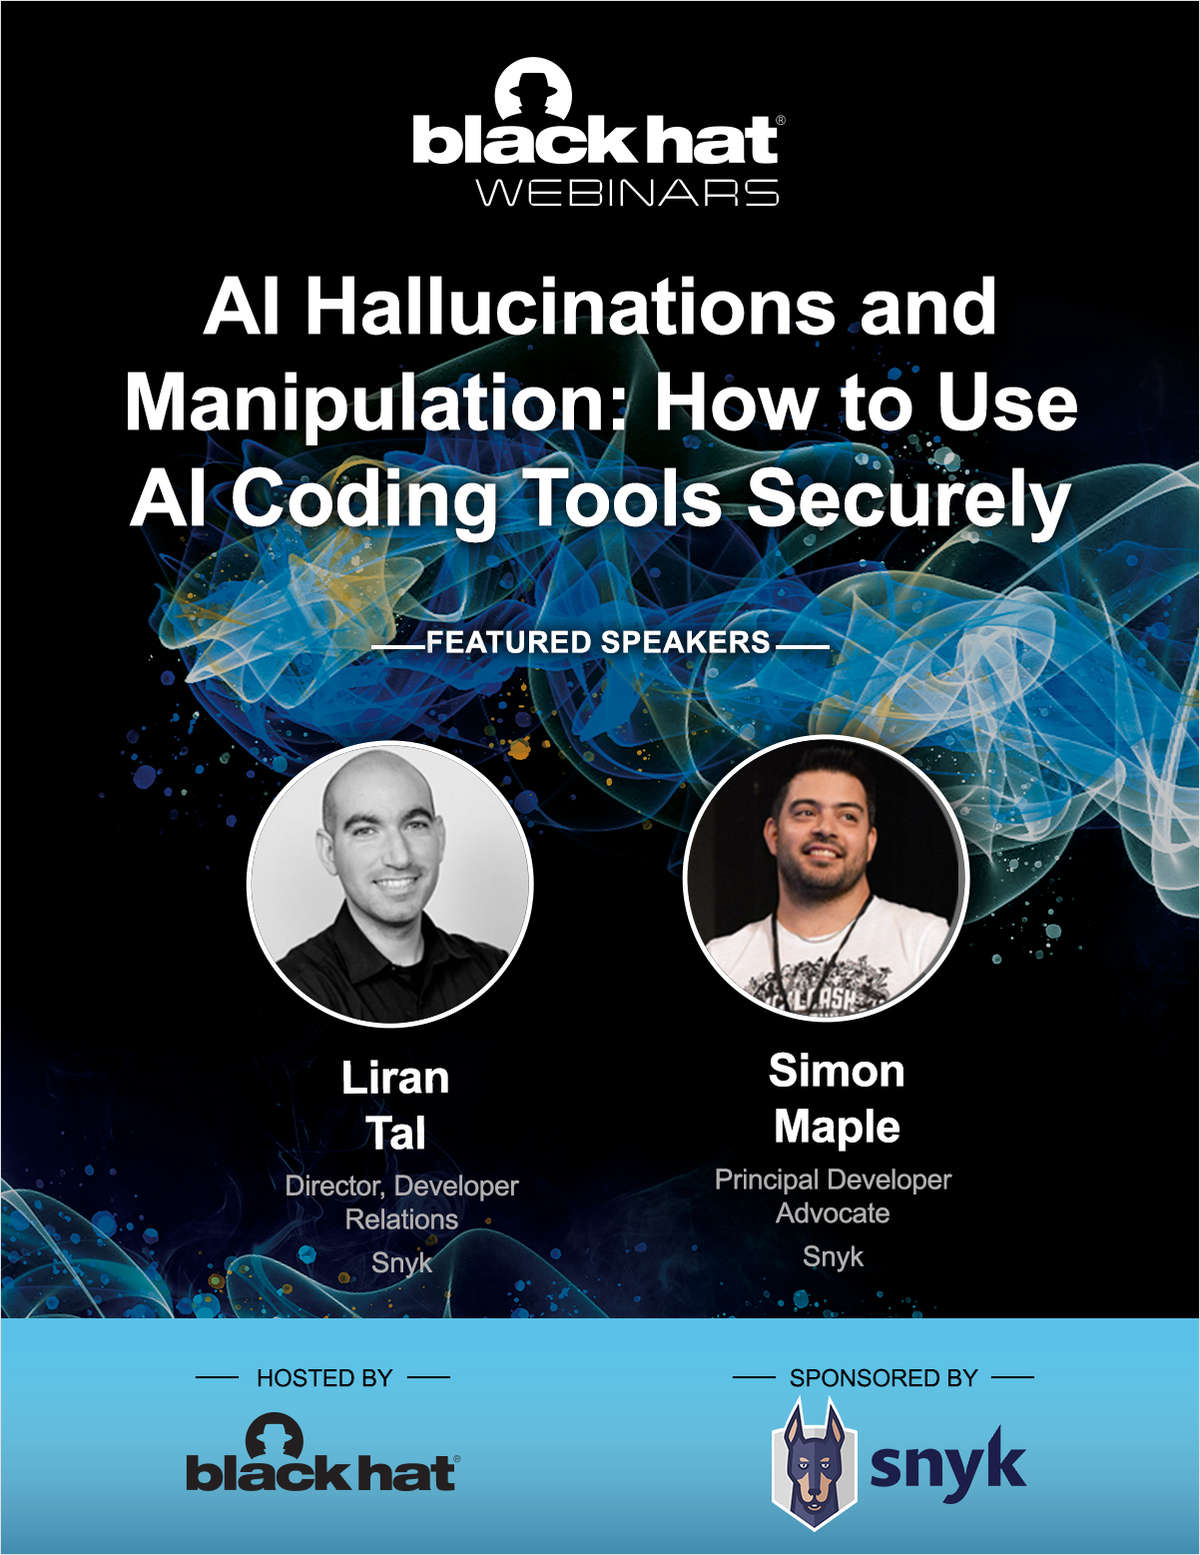 AI Hallucinations and Manipulation: How to Use AI Coding Tools Securely